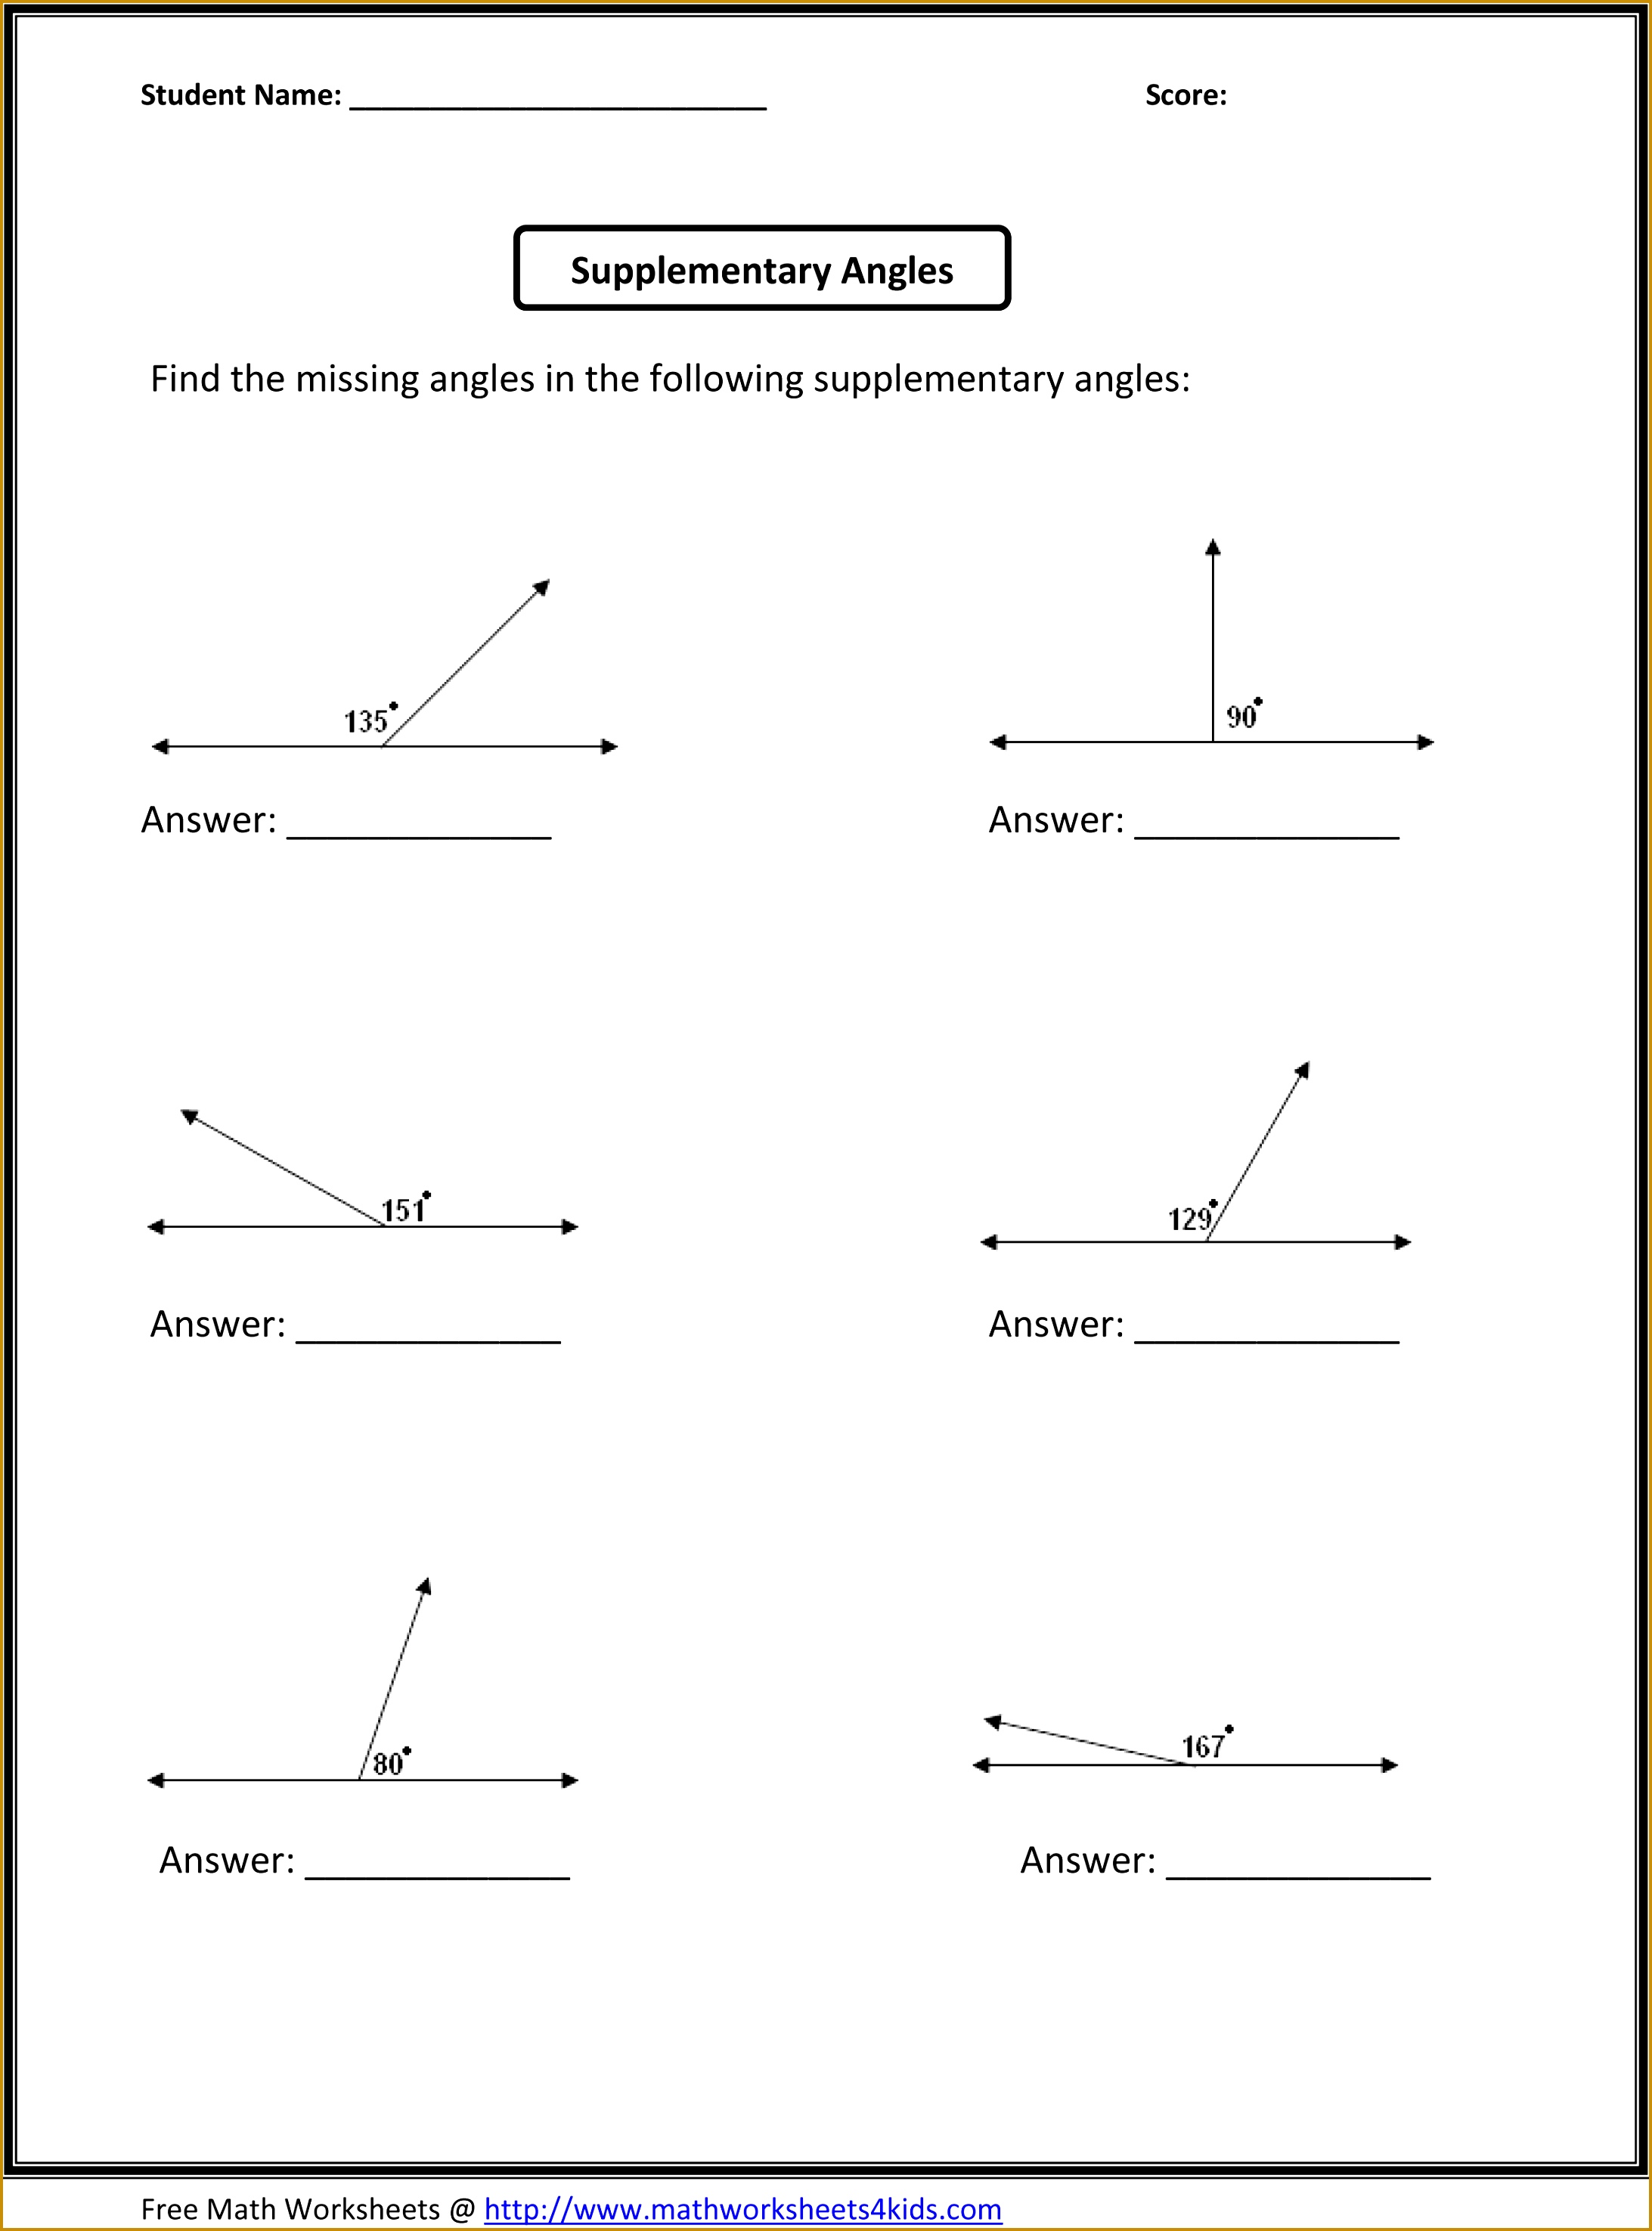 Sixth grade math worksheets have ratio multiplying and dividing fractions probability and more 29512185